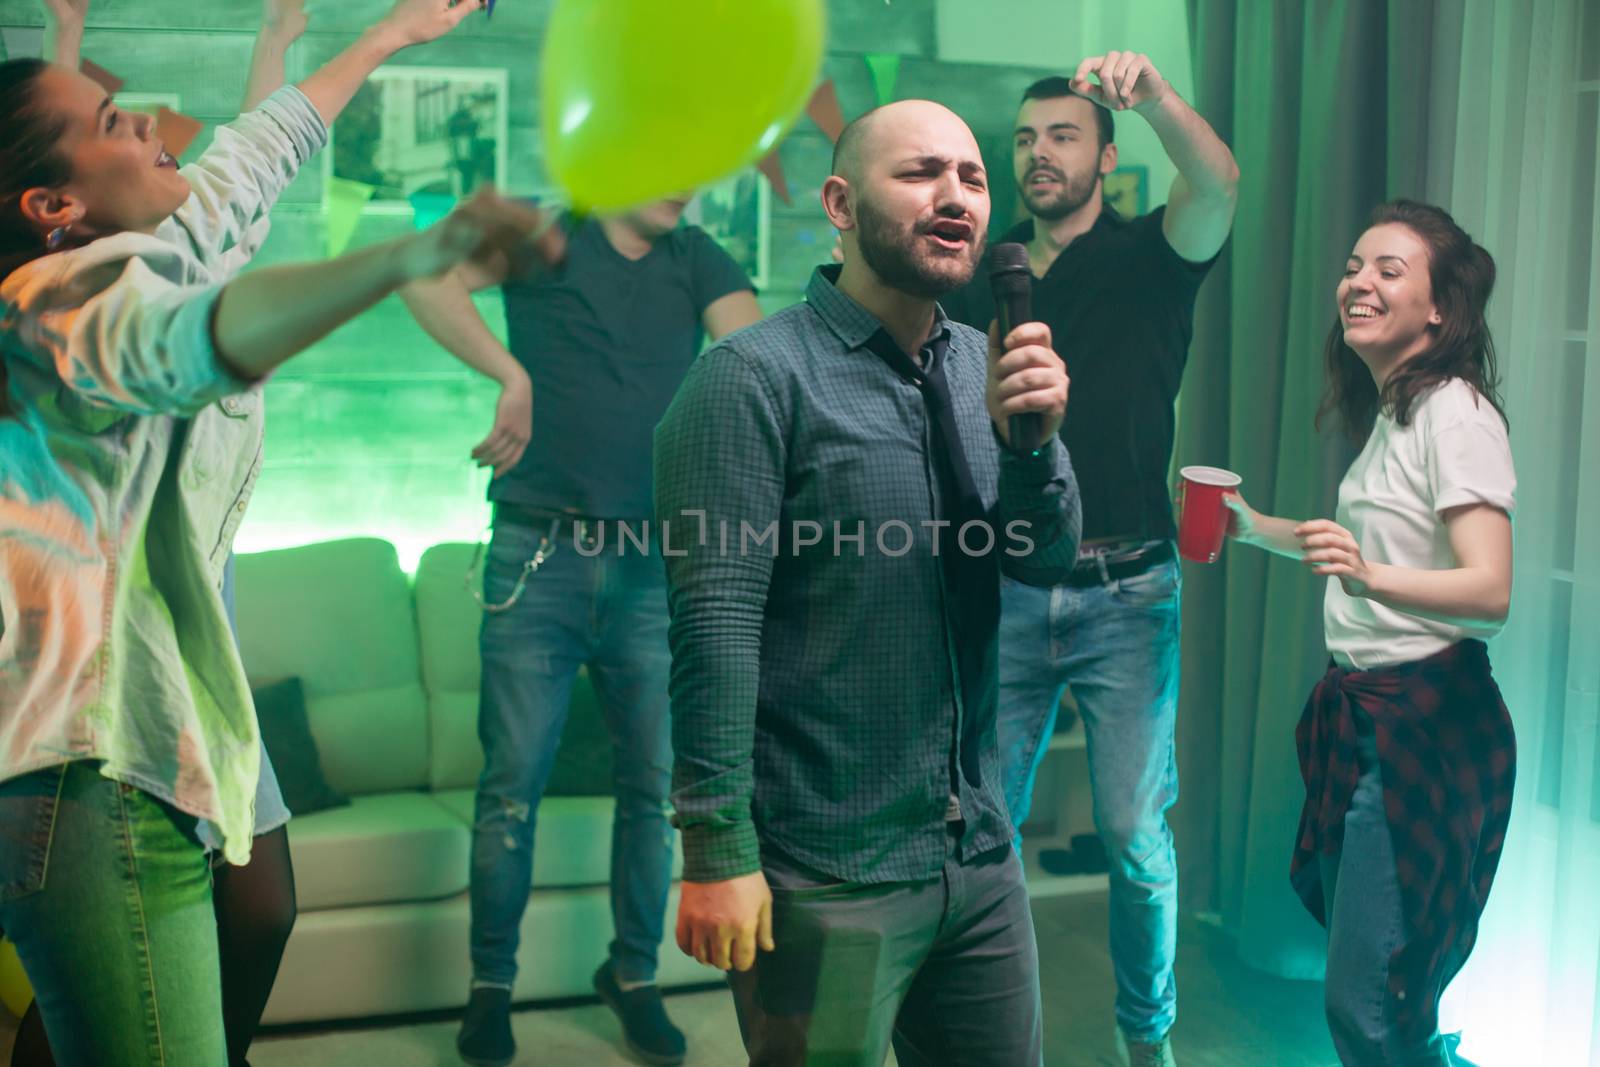 Cheerful bald man doing karaoke for his friends at the party.